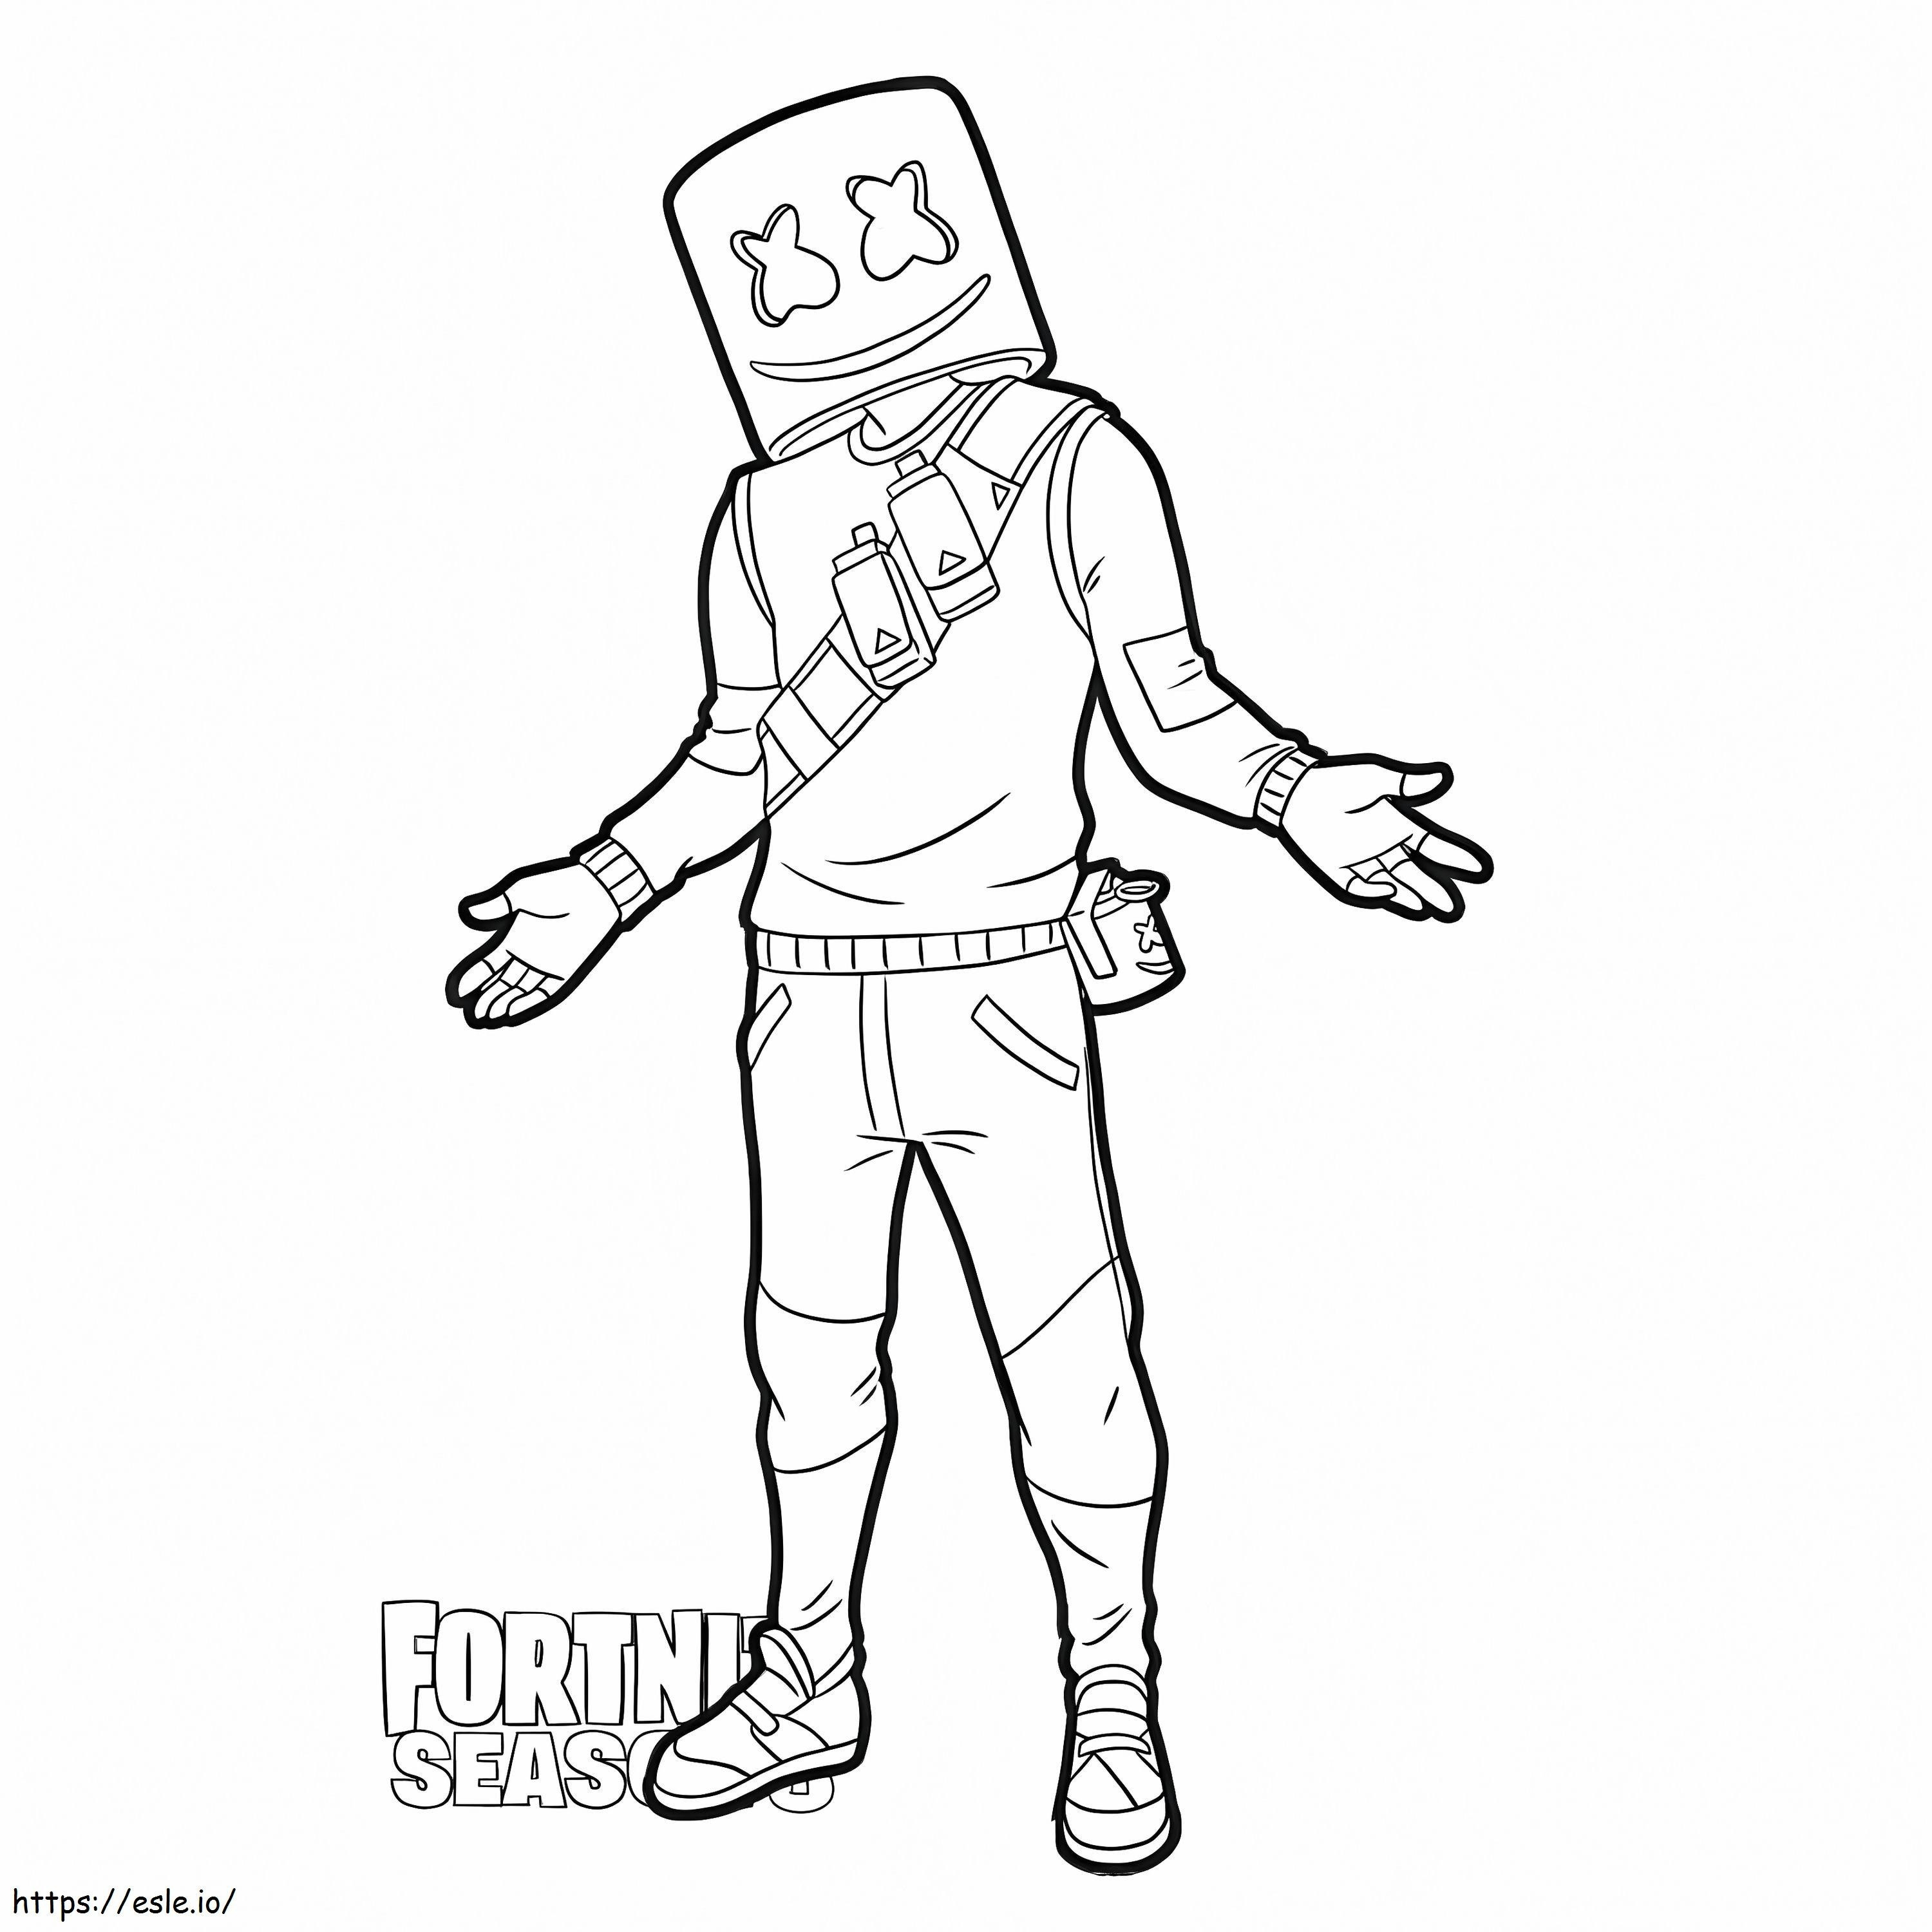 Marshmello 1 coloring page